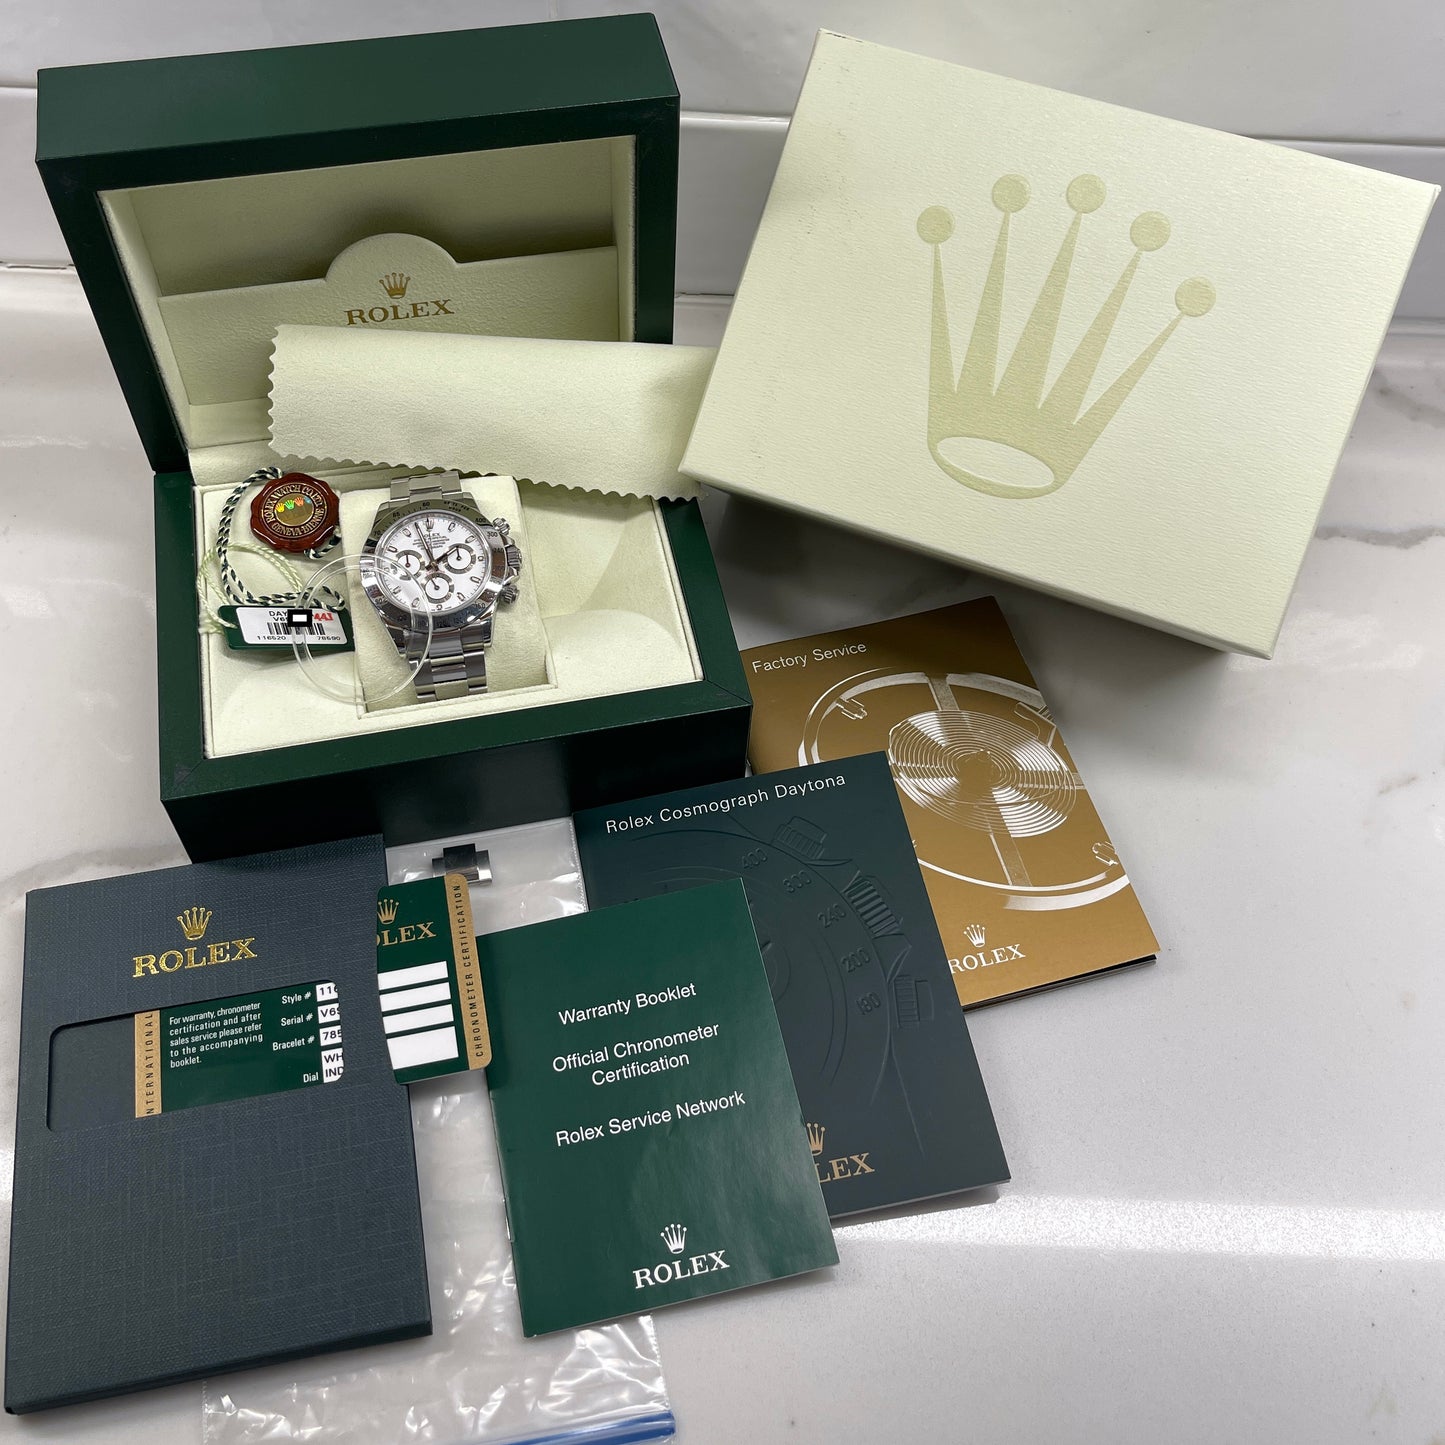 2008 Rolex Daytona Cosmograph 116520 White Steel Oyster Automatic Chronograph - Hashtag Watch Company